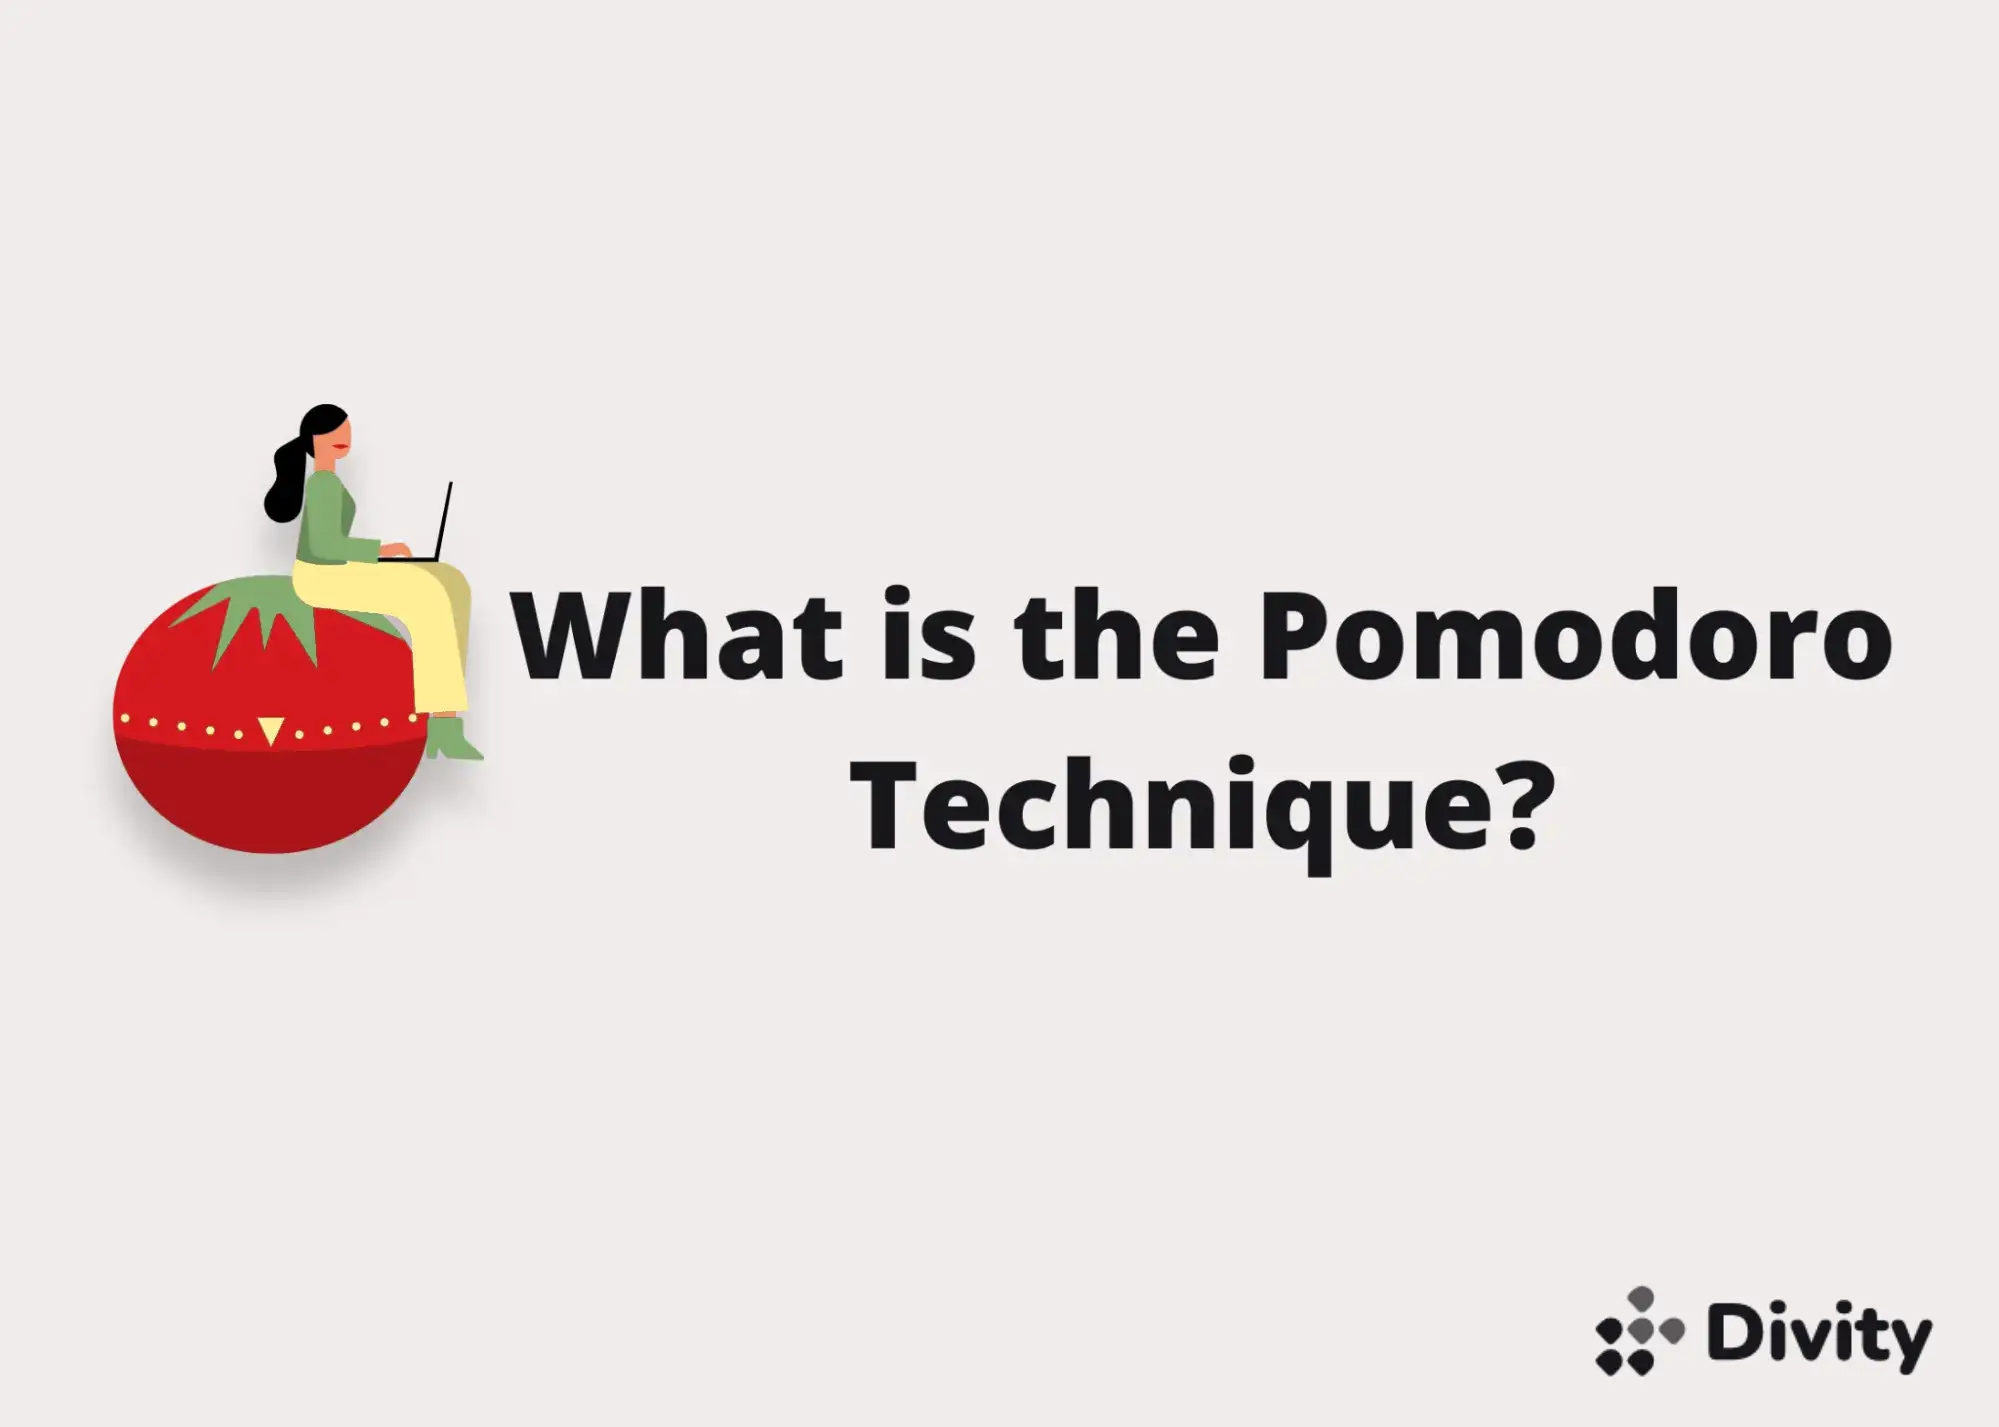 The Pomodoro Technique: You Can Tackle Any Task 25 Minutes at a Time